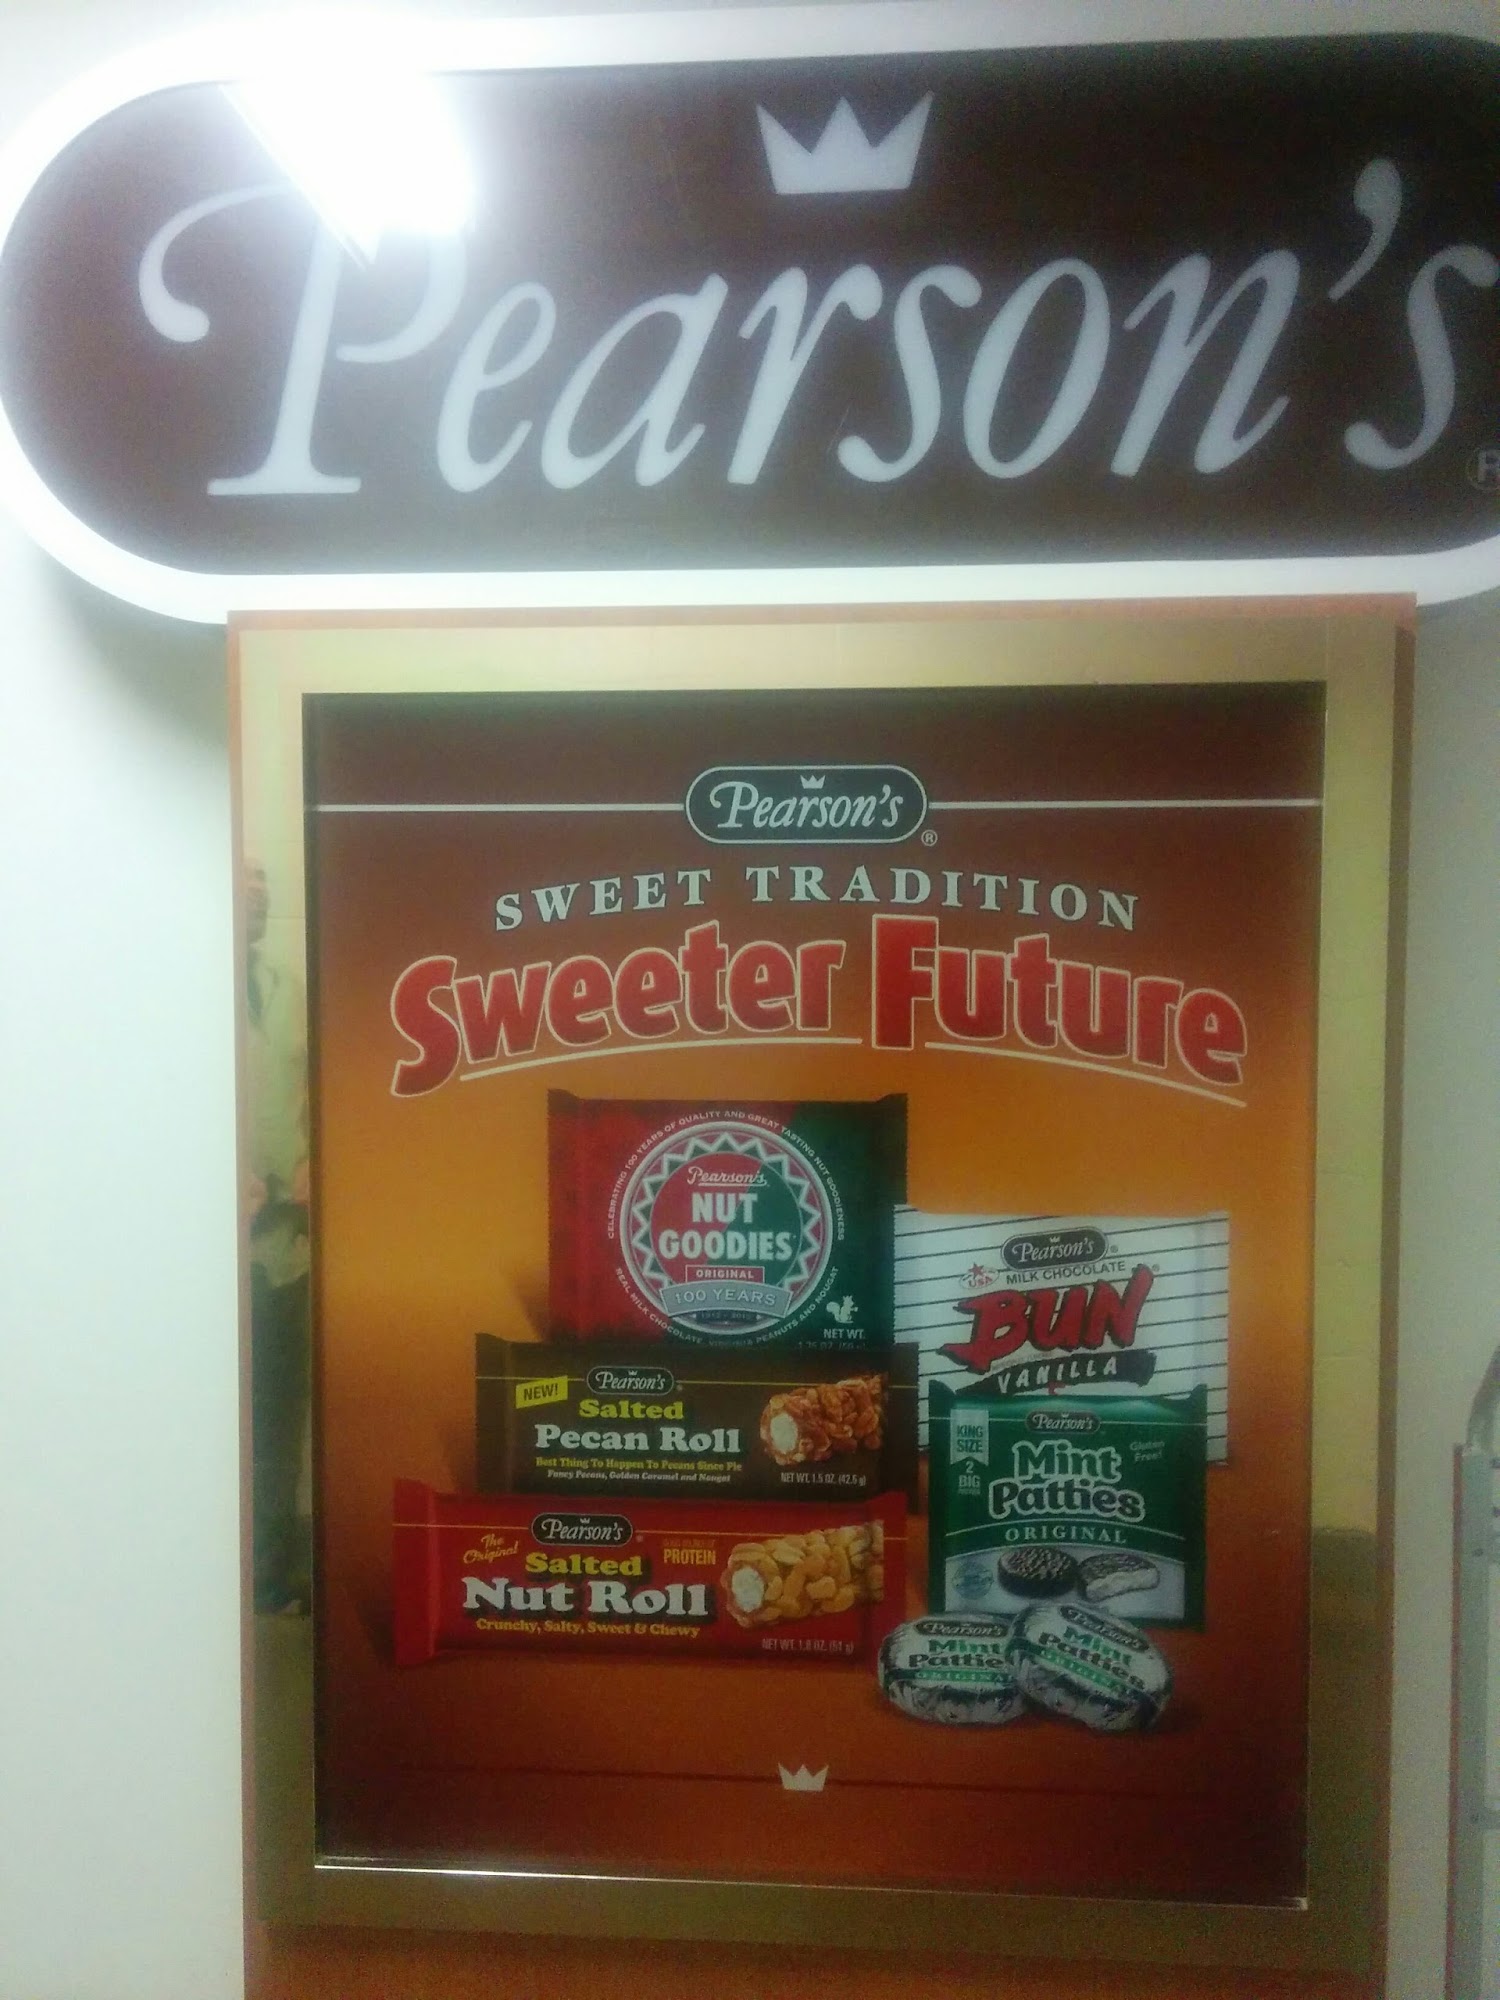 Pearson's Candy Co